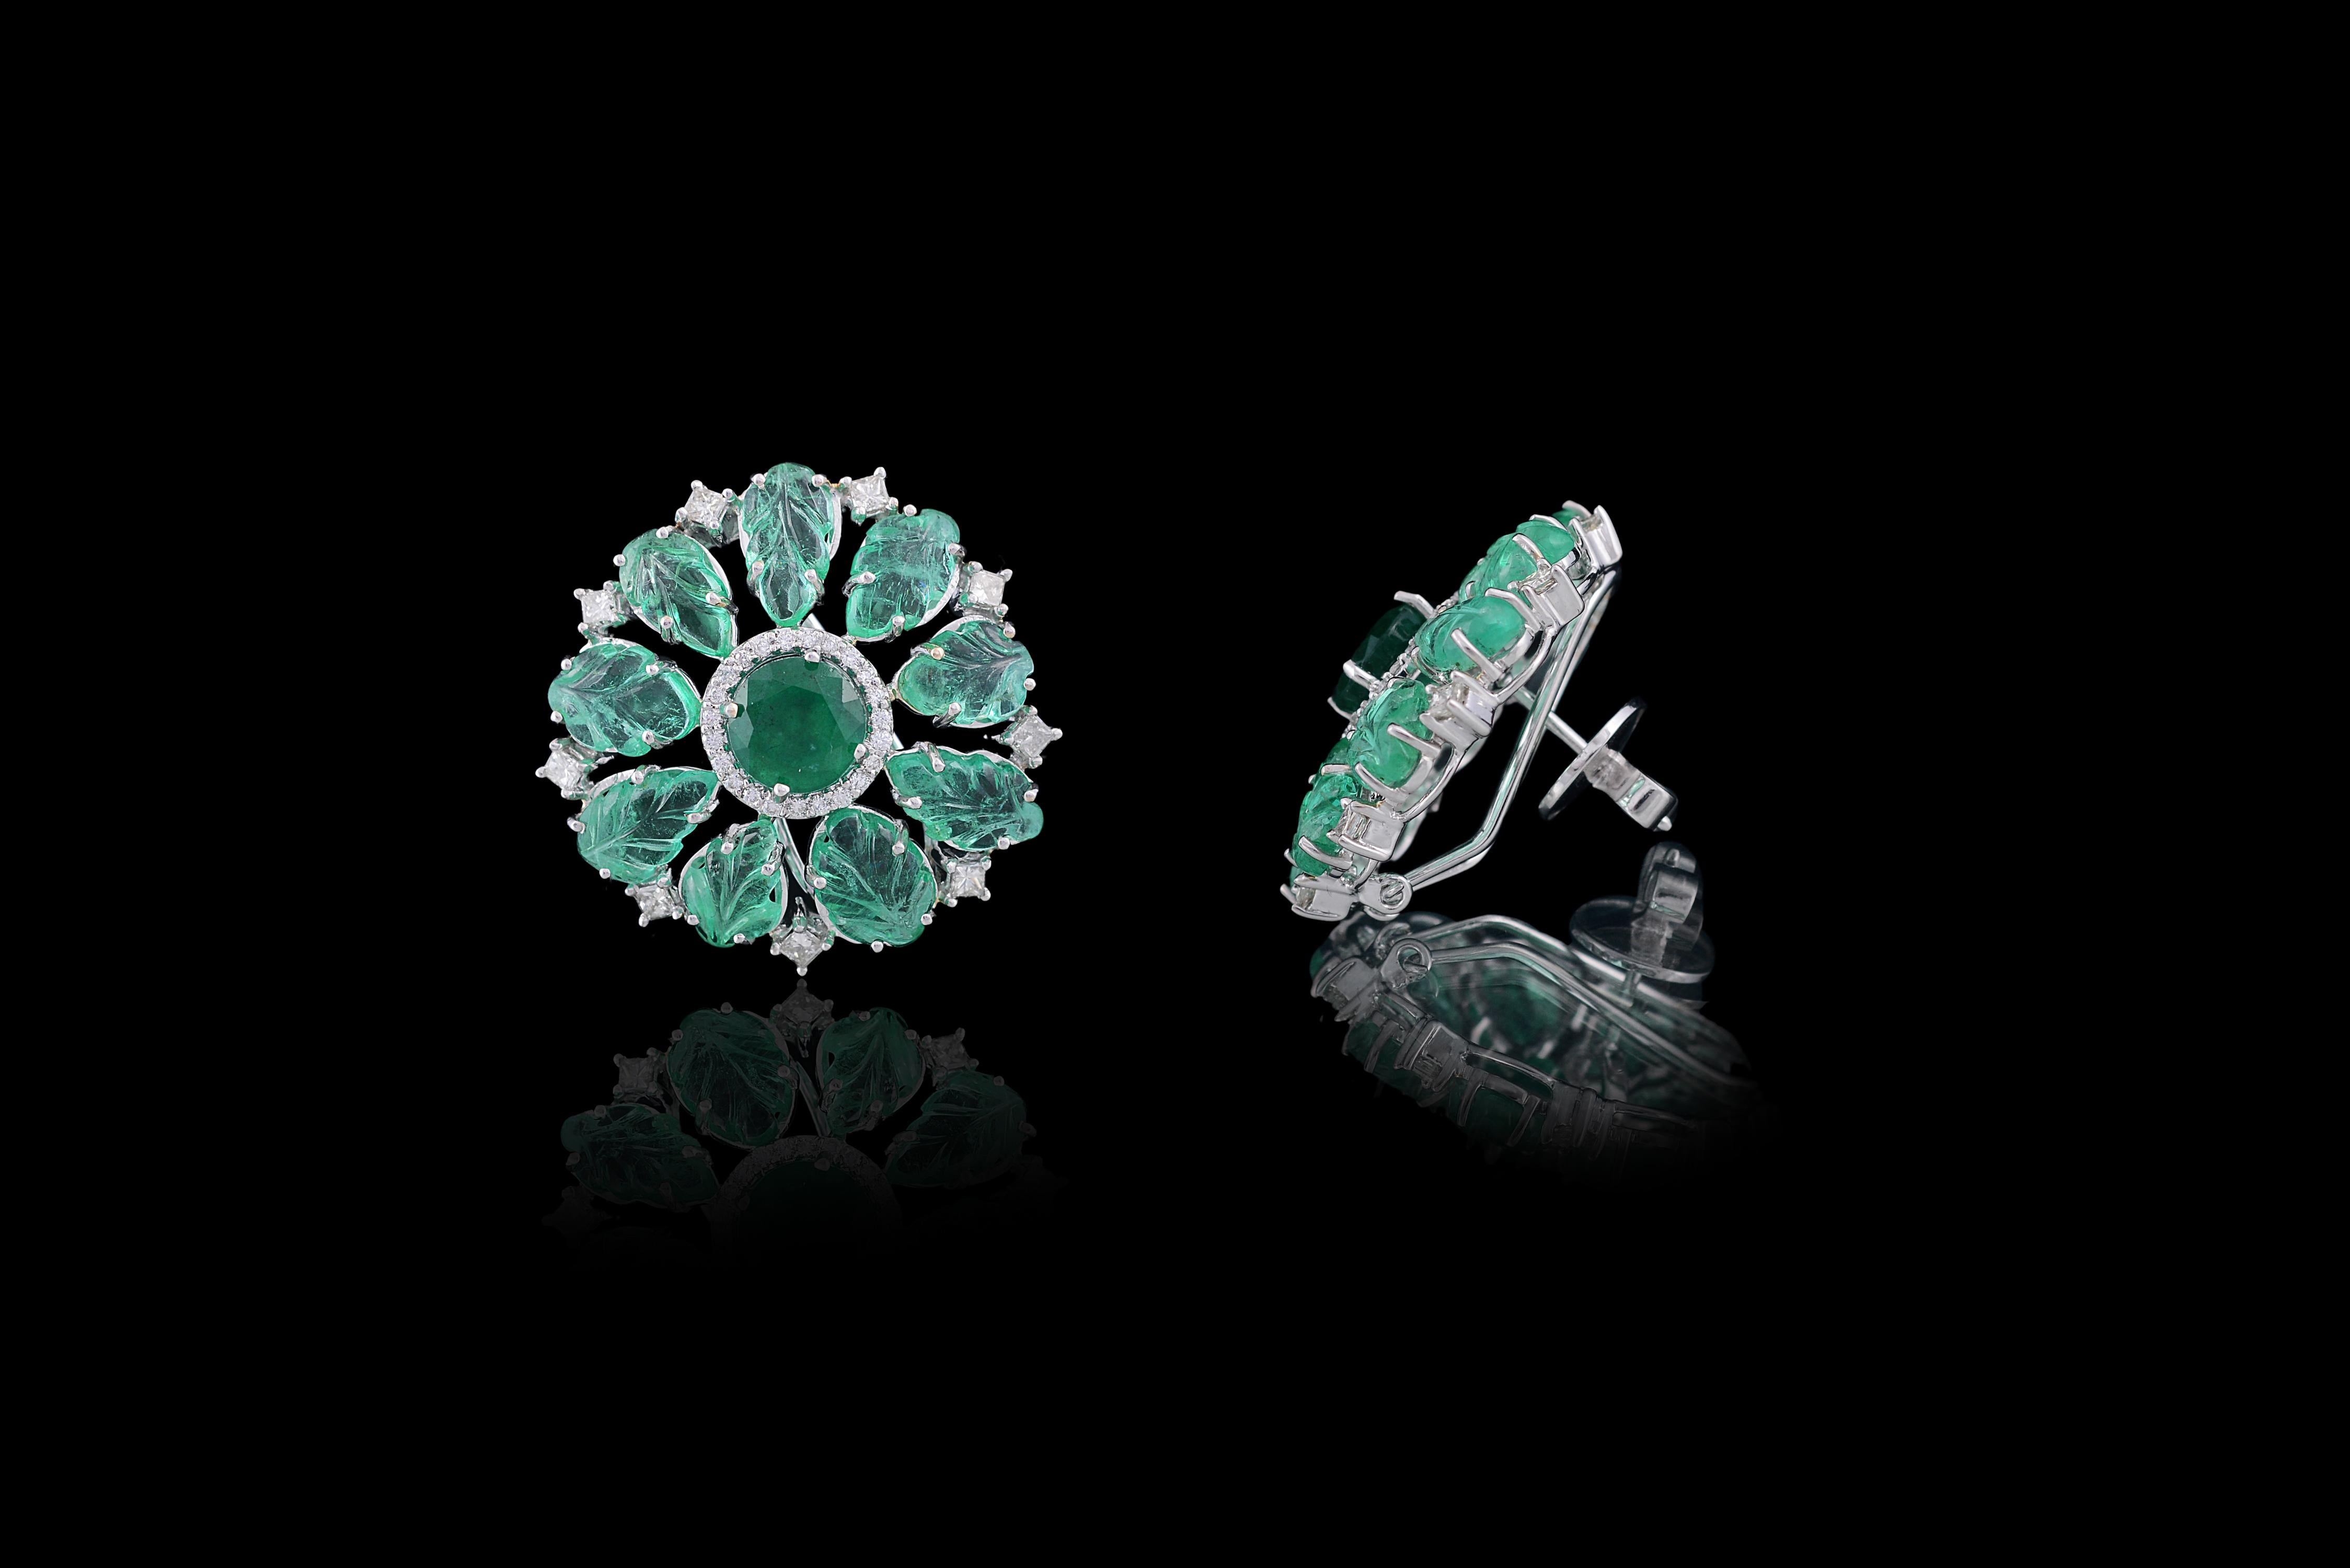 Gorgeous cut and carved emerald studs earring set in 18K white gold with diamonds. Both the leaves and the cut emerald are natural without any treatment. The emerald leaves weigh 11.32 carats whereas the cut weighs 3.2 carats. The diamond weight is